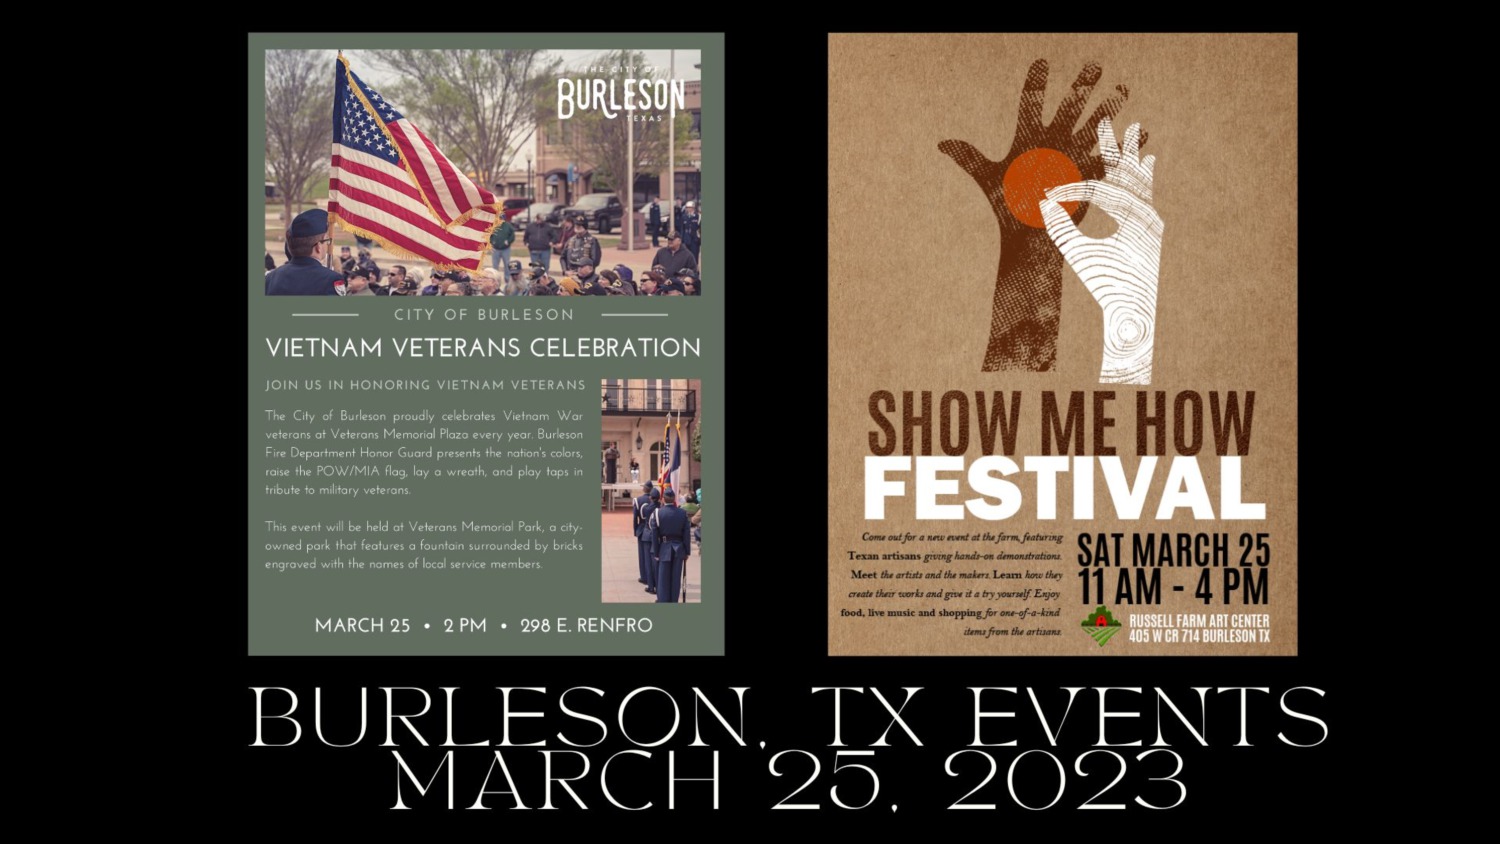 Happening on March 25 in Burleson, TX! Burleson, TX weekend events and